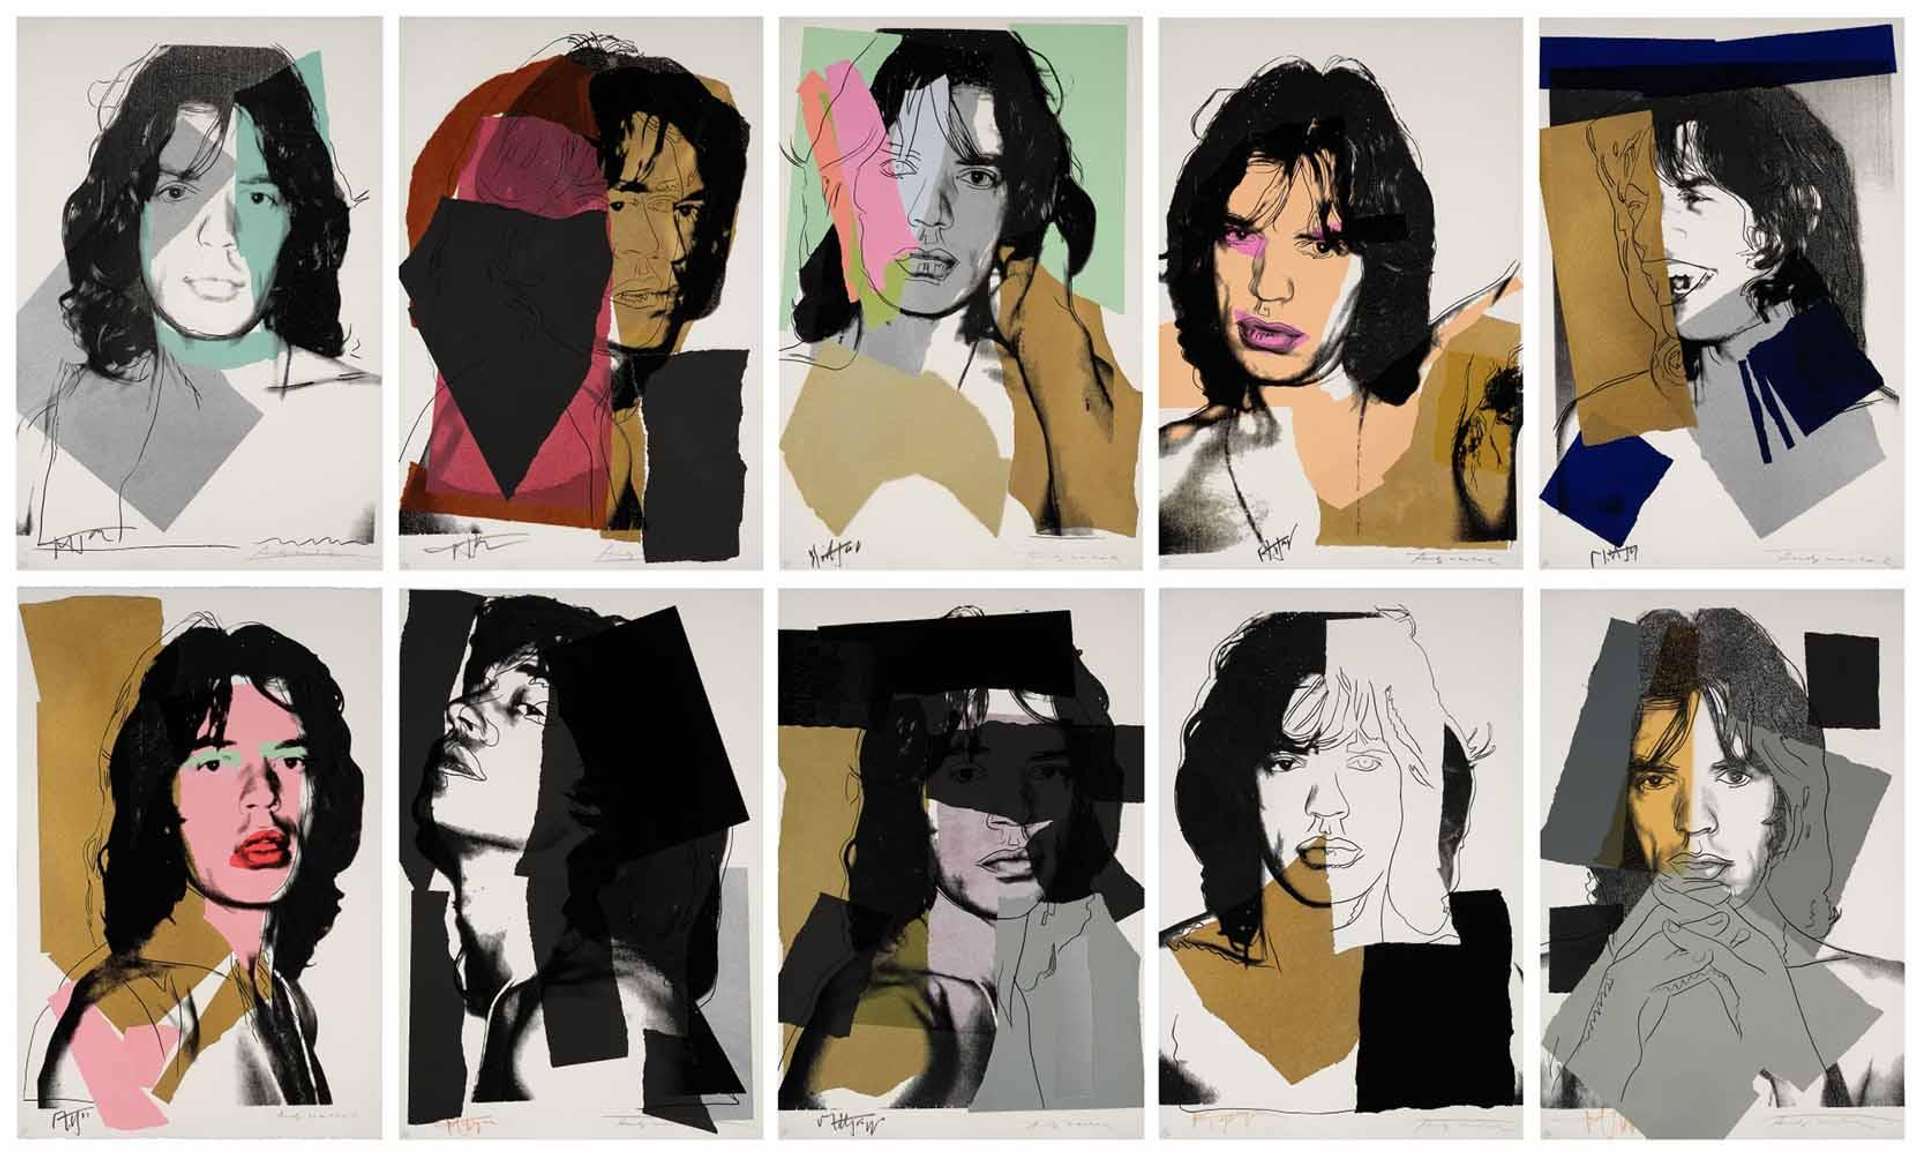 A set of 10 screenprints by Andy Warhol depicting Mick Jagger in various poses and colourways.